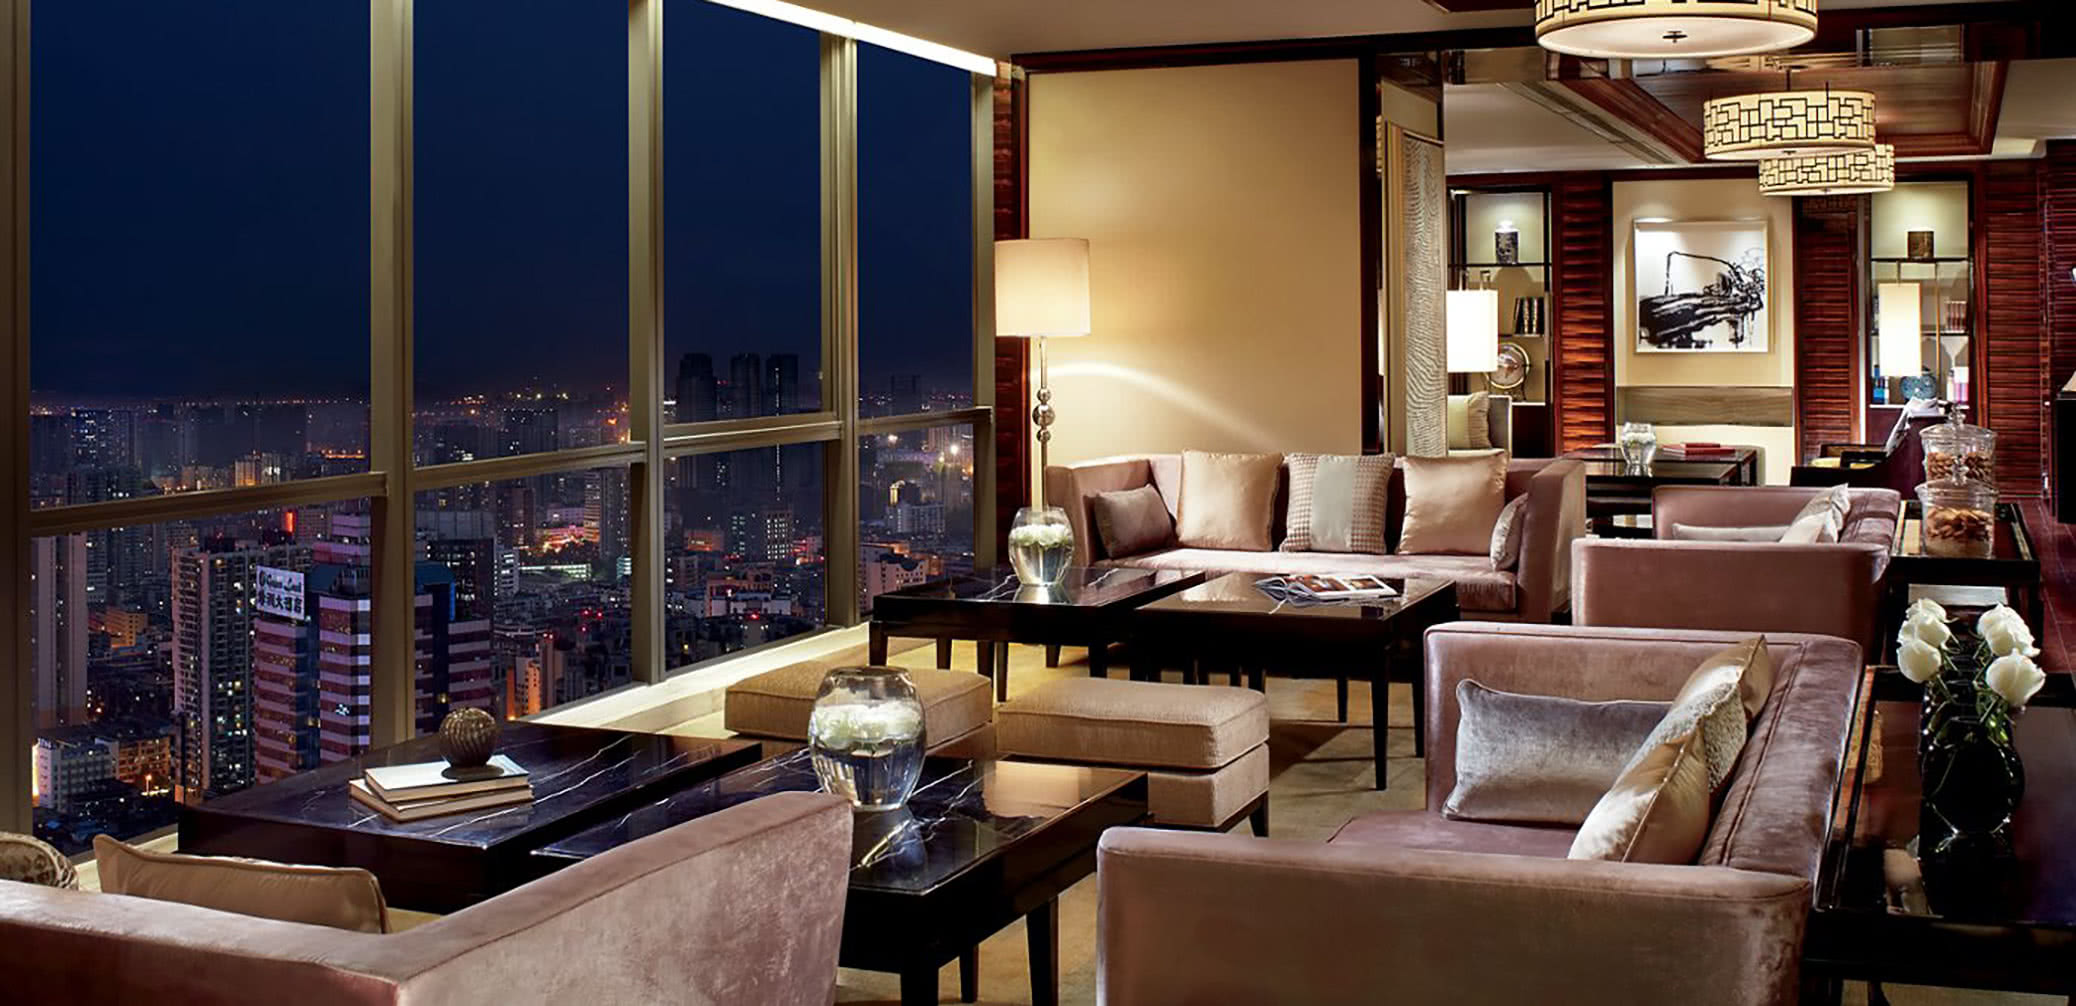 Best Hotel Executive Club Lounges In Chengdu, China